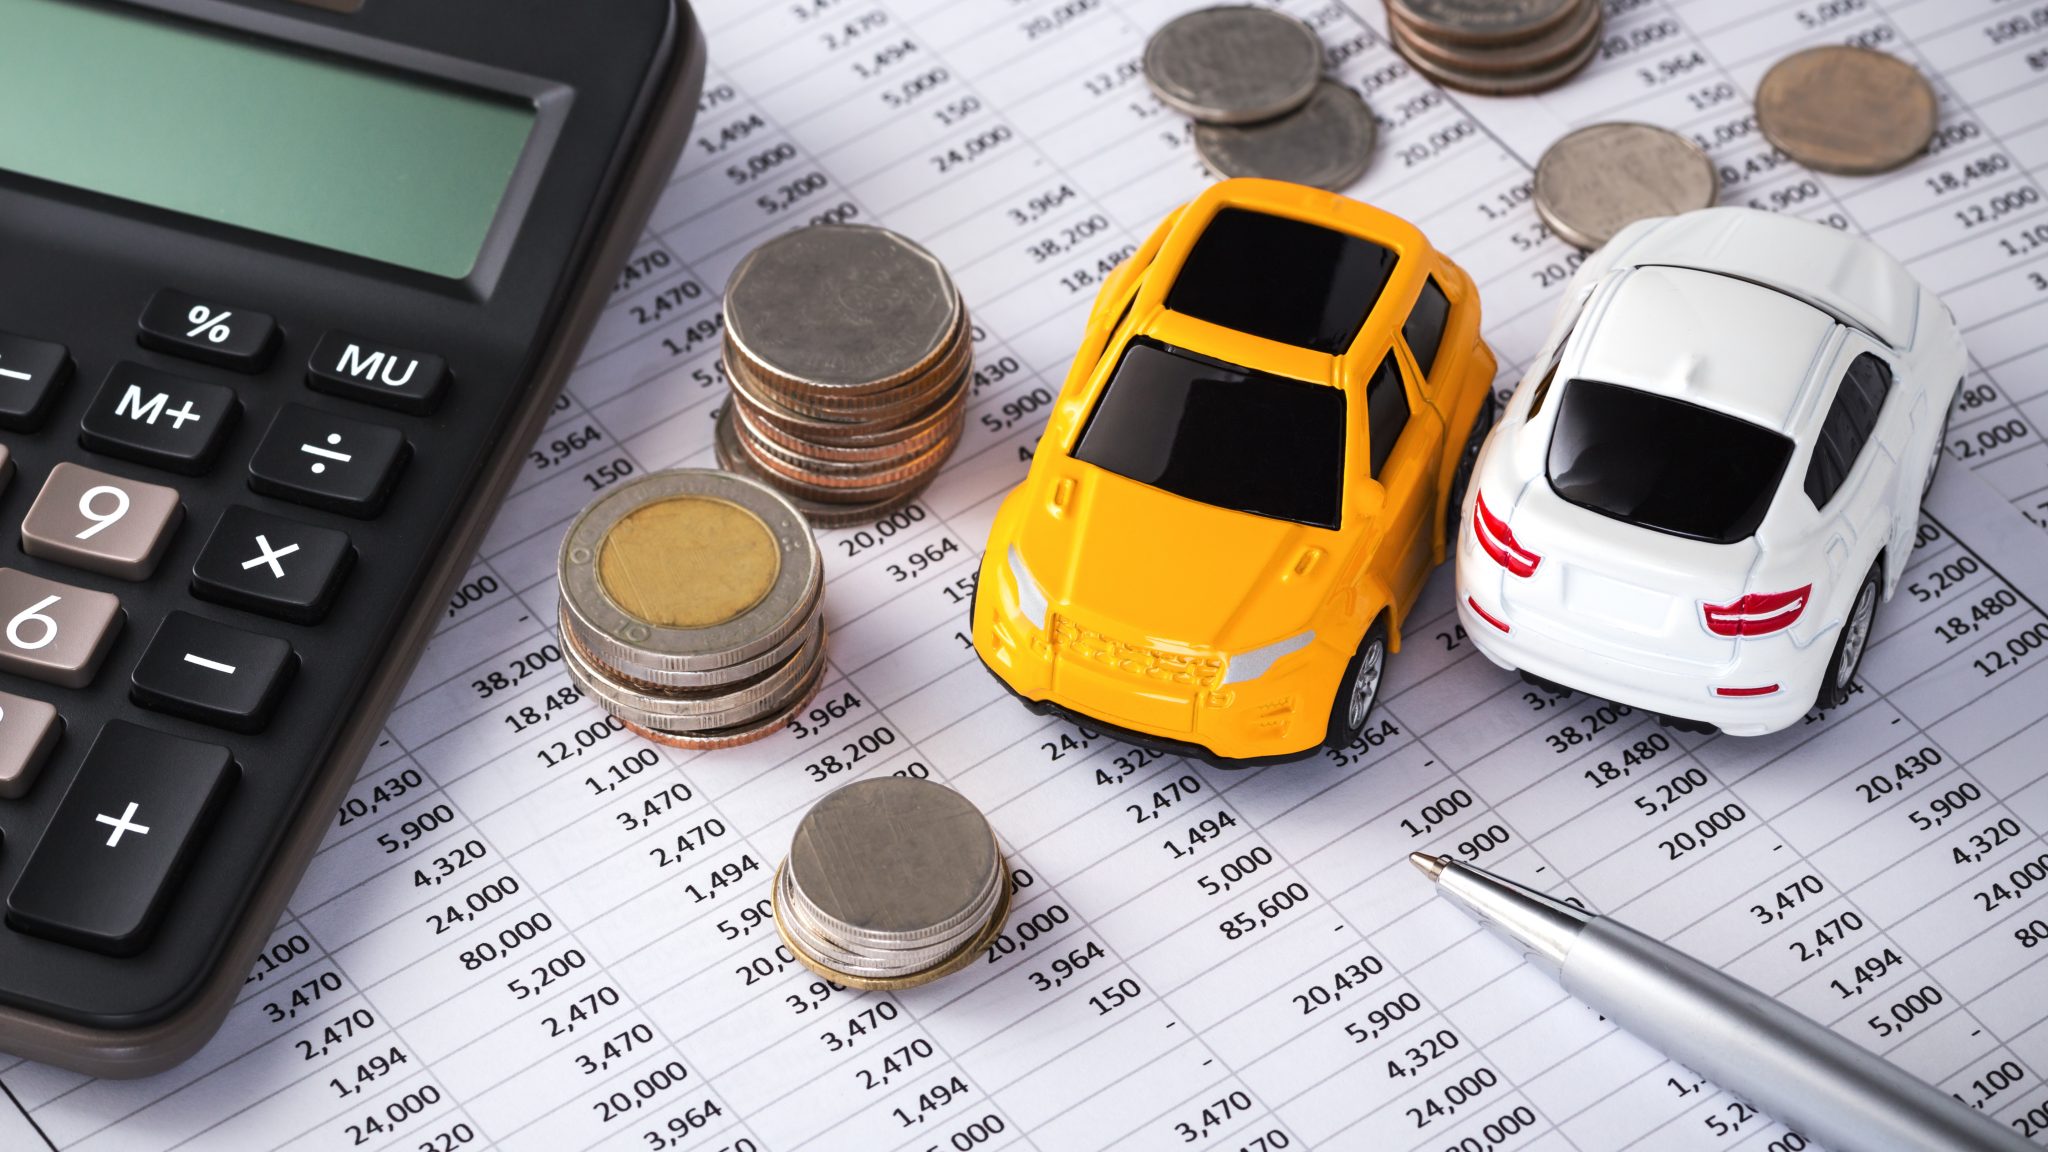 Car Finance Meaning The Meaning Of Car Finance Casca Grossa